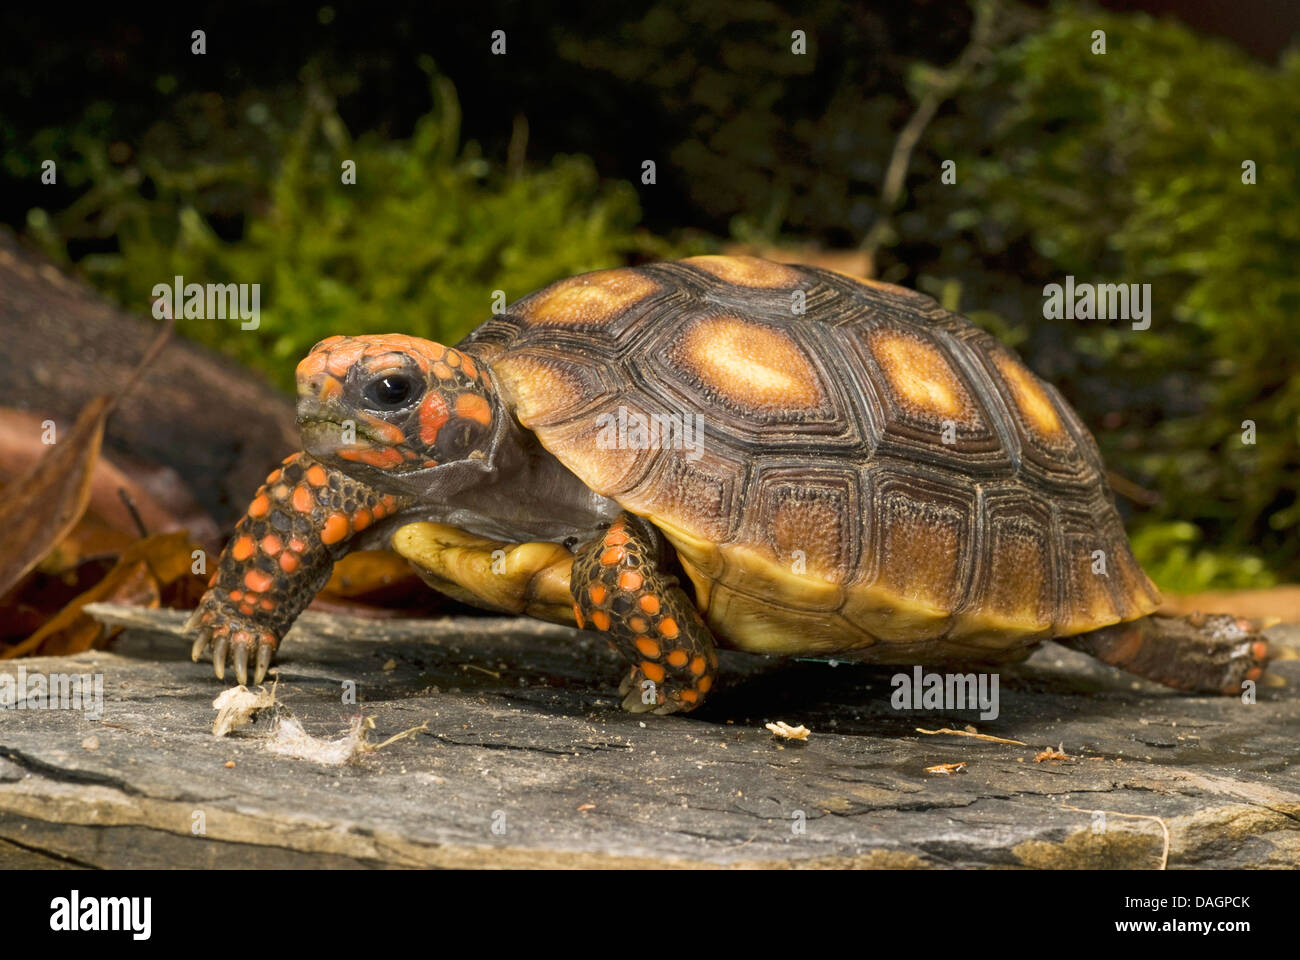 Red-footed tortoise, South American red-footed tortoise, Coal tortoise (Geochelone carbonaria, Testudo carbonaria, Chelonoidis carbonaria), walking Stock Photo